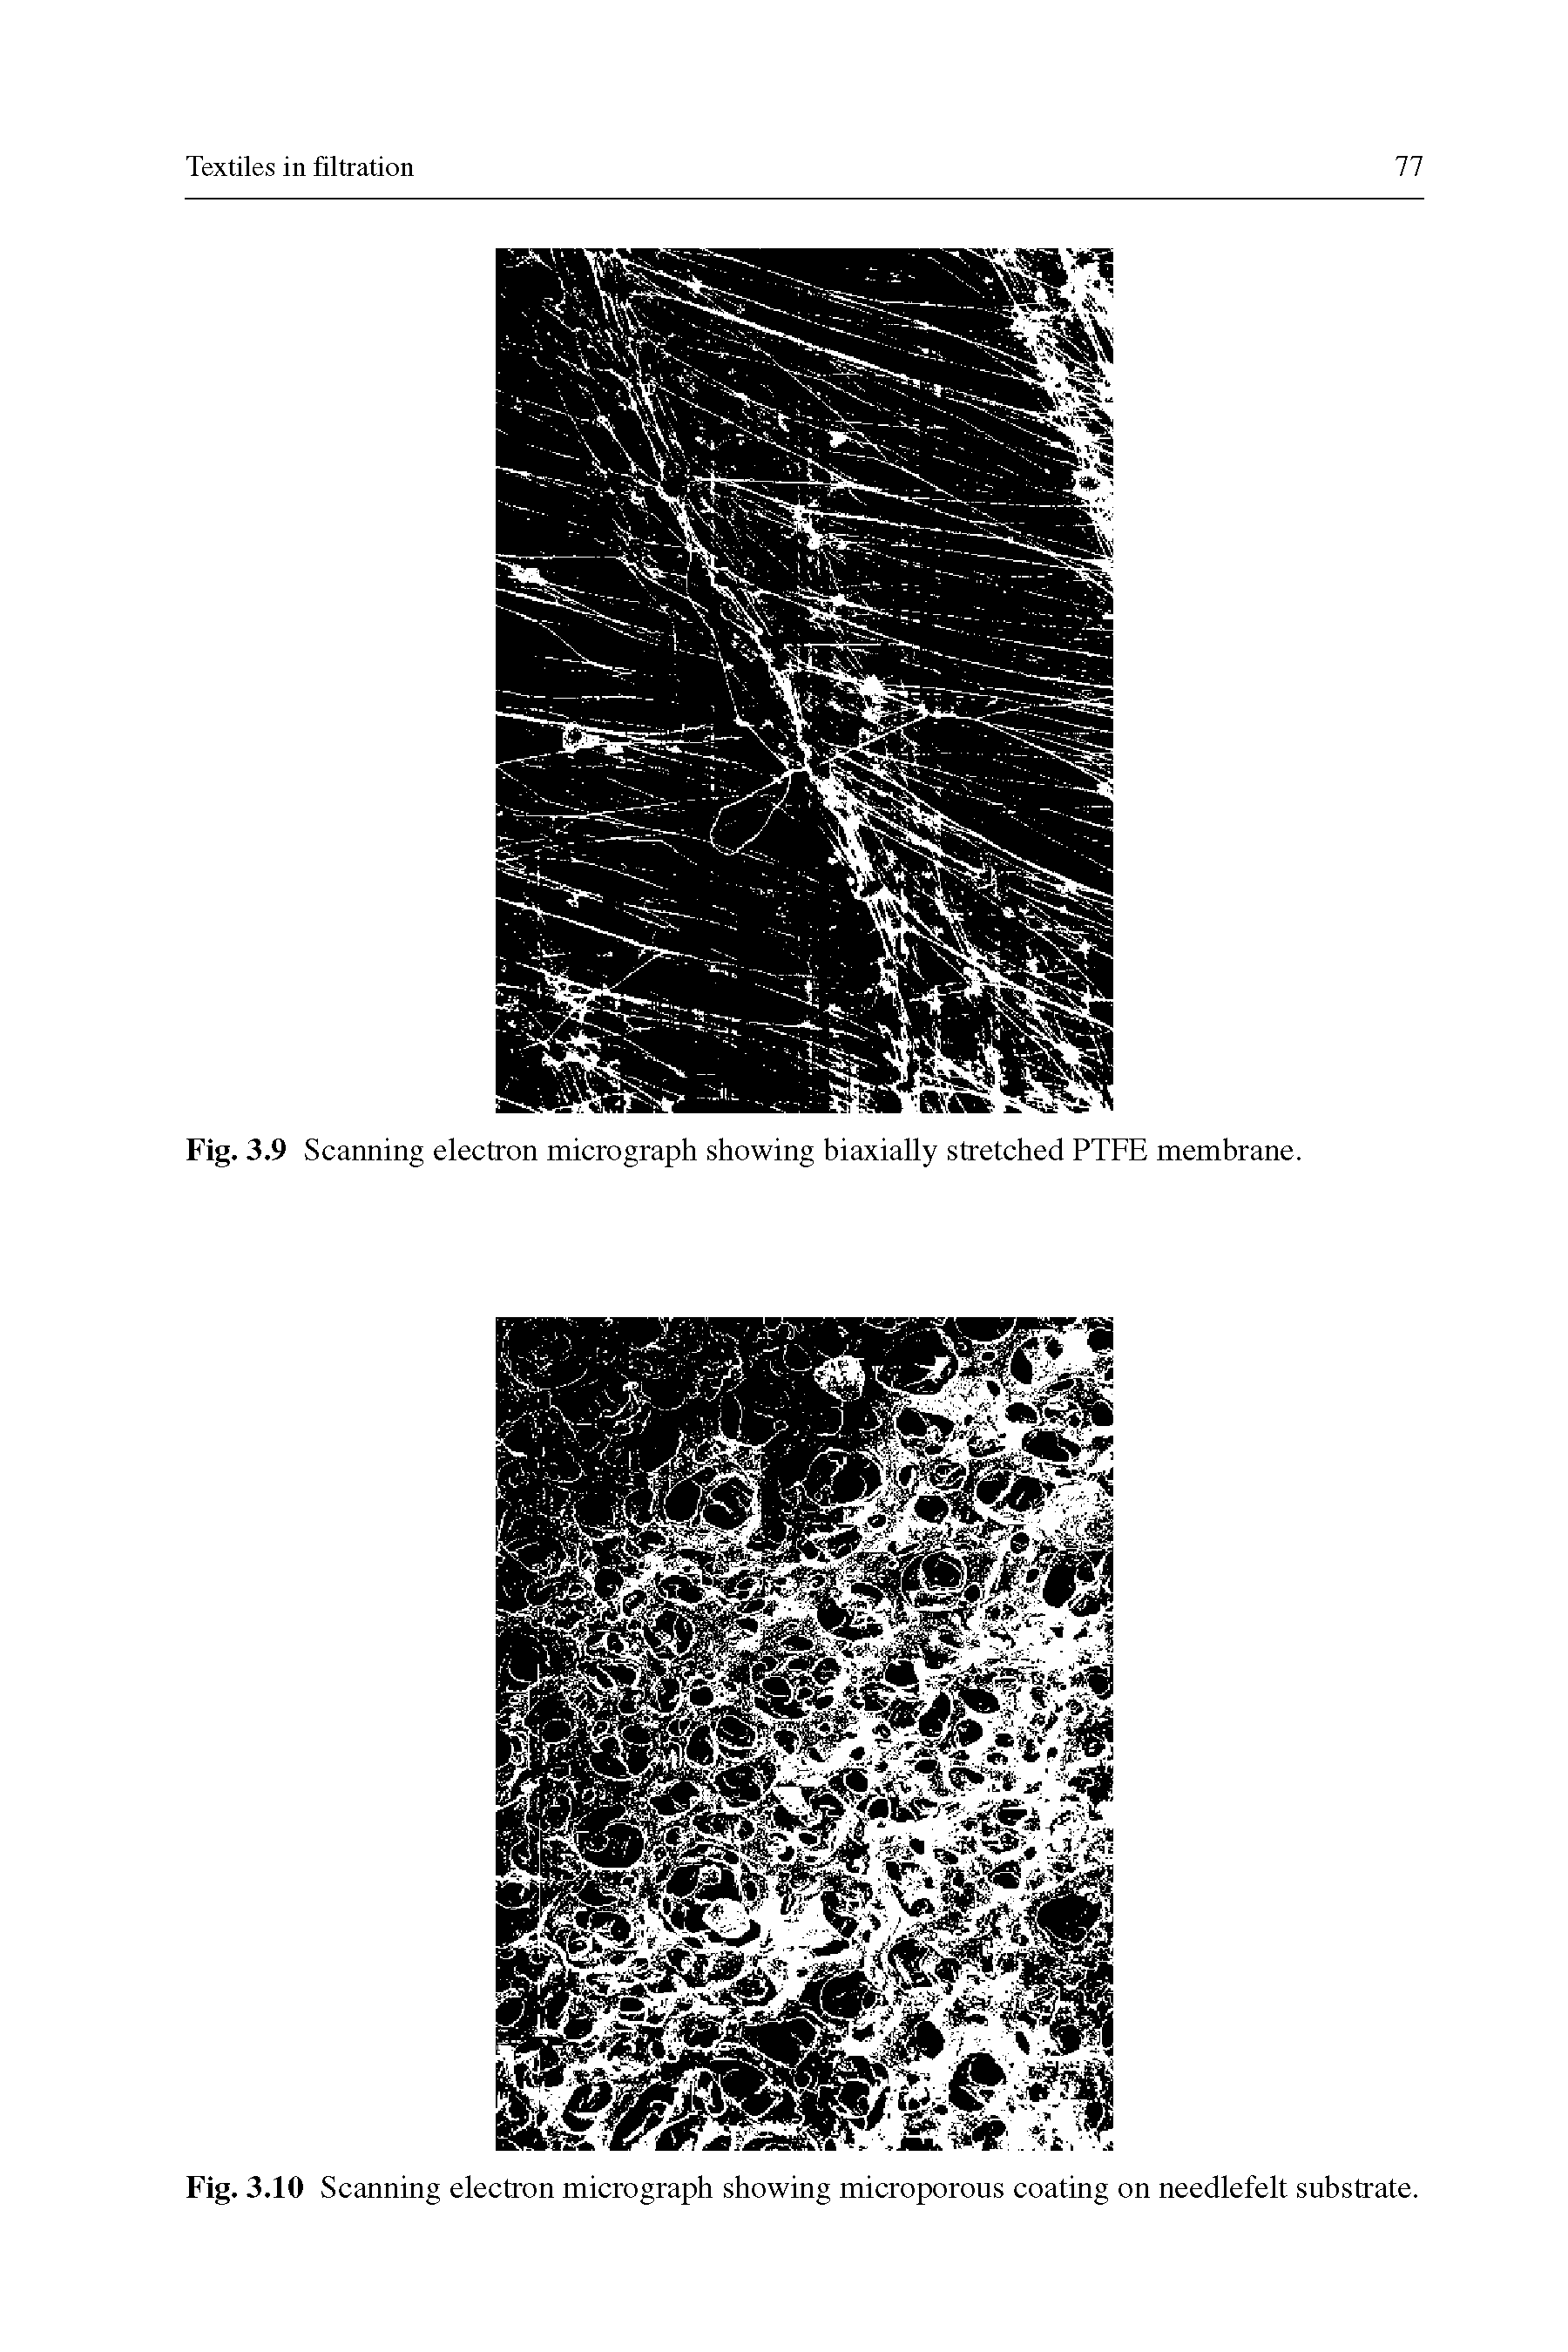 Fig. 3.10 Scanning electron micrograph showing microporous coating on needlefelt substrate.